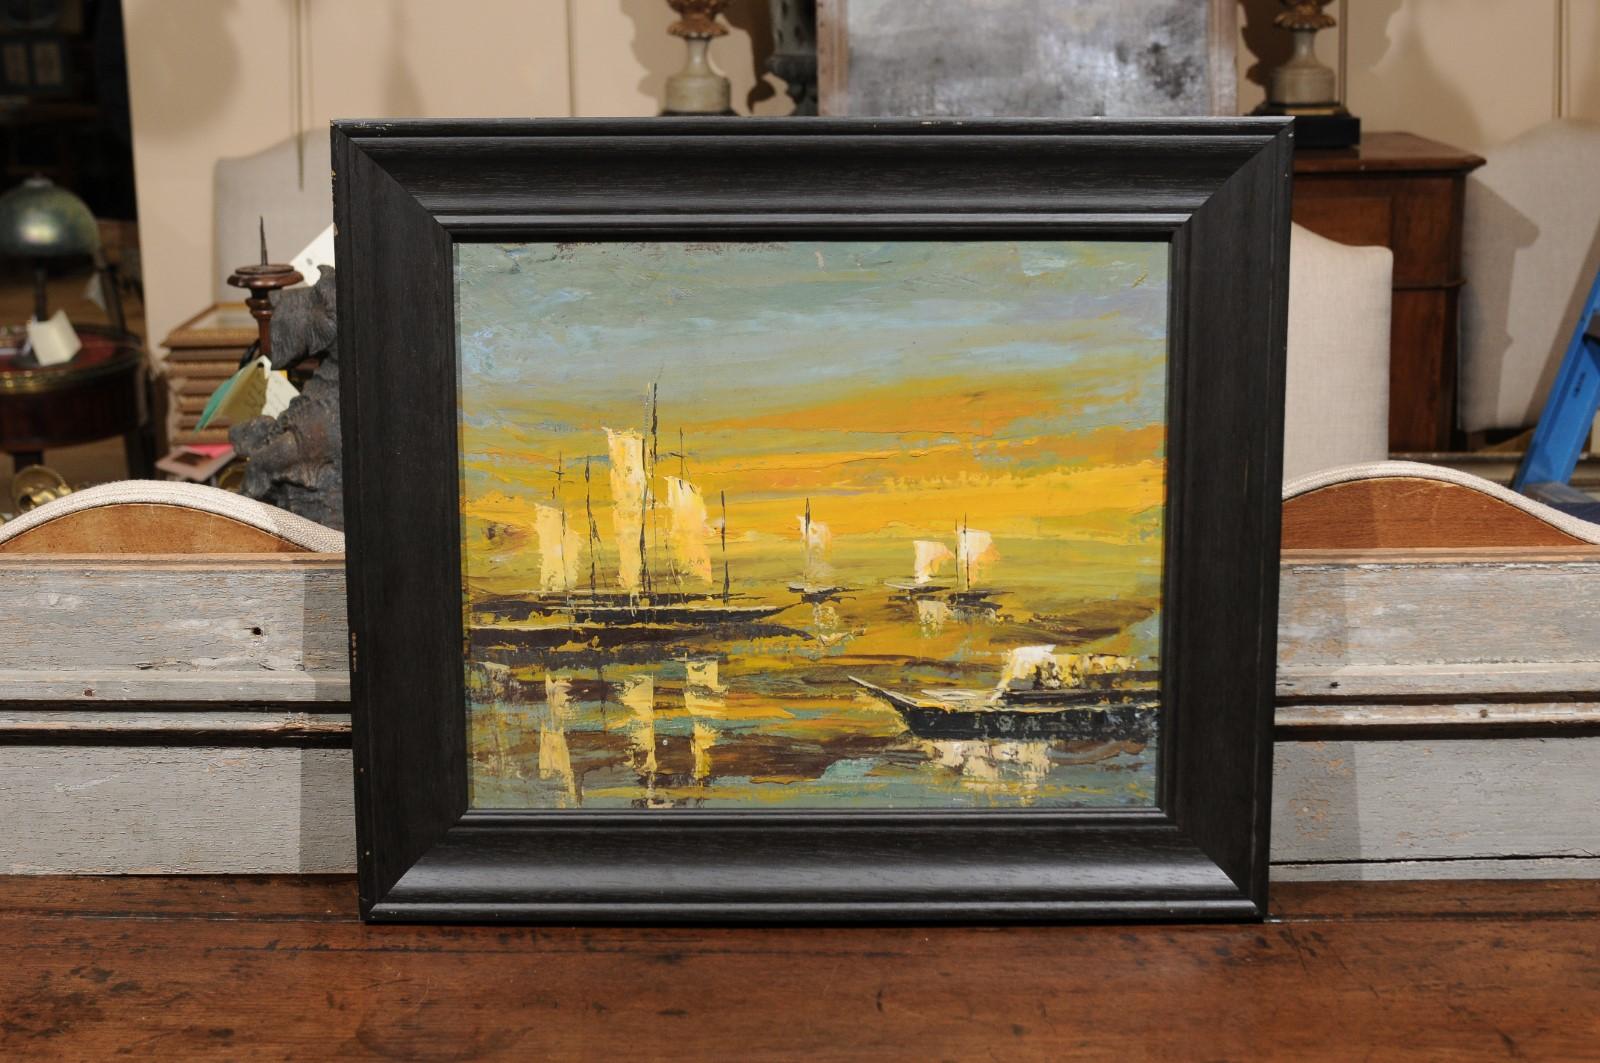 20th century oil on canvas seascape painting in blues and yellows with sailboats, in black painted frame.